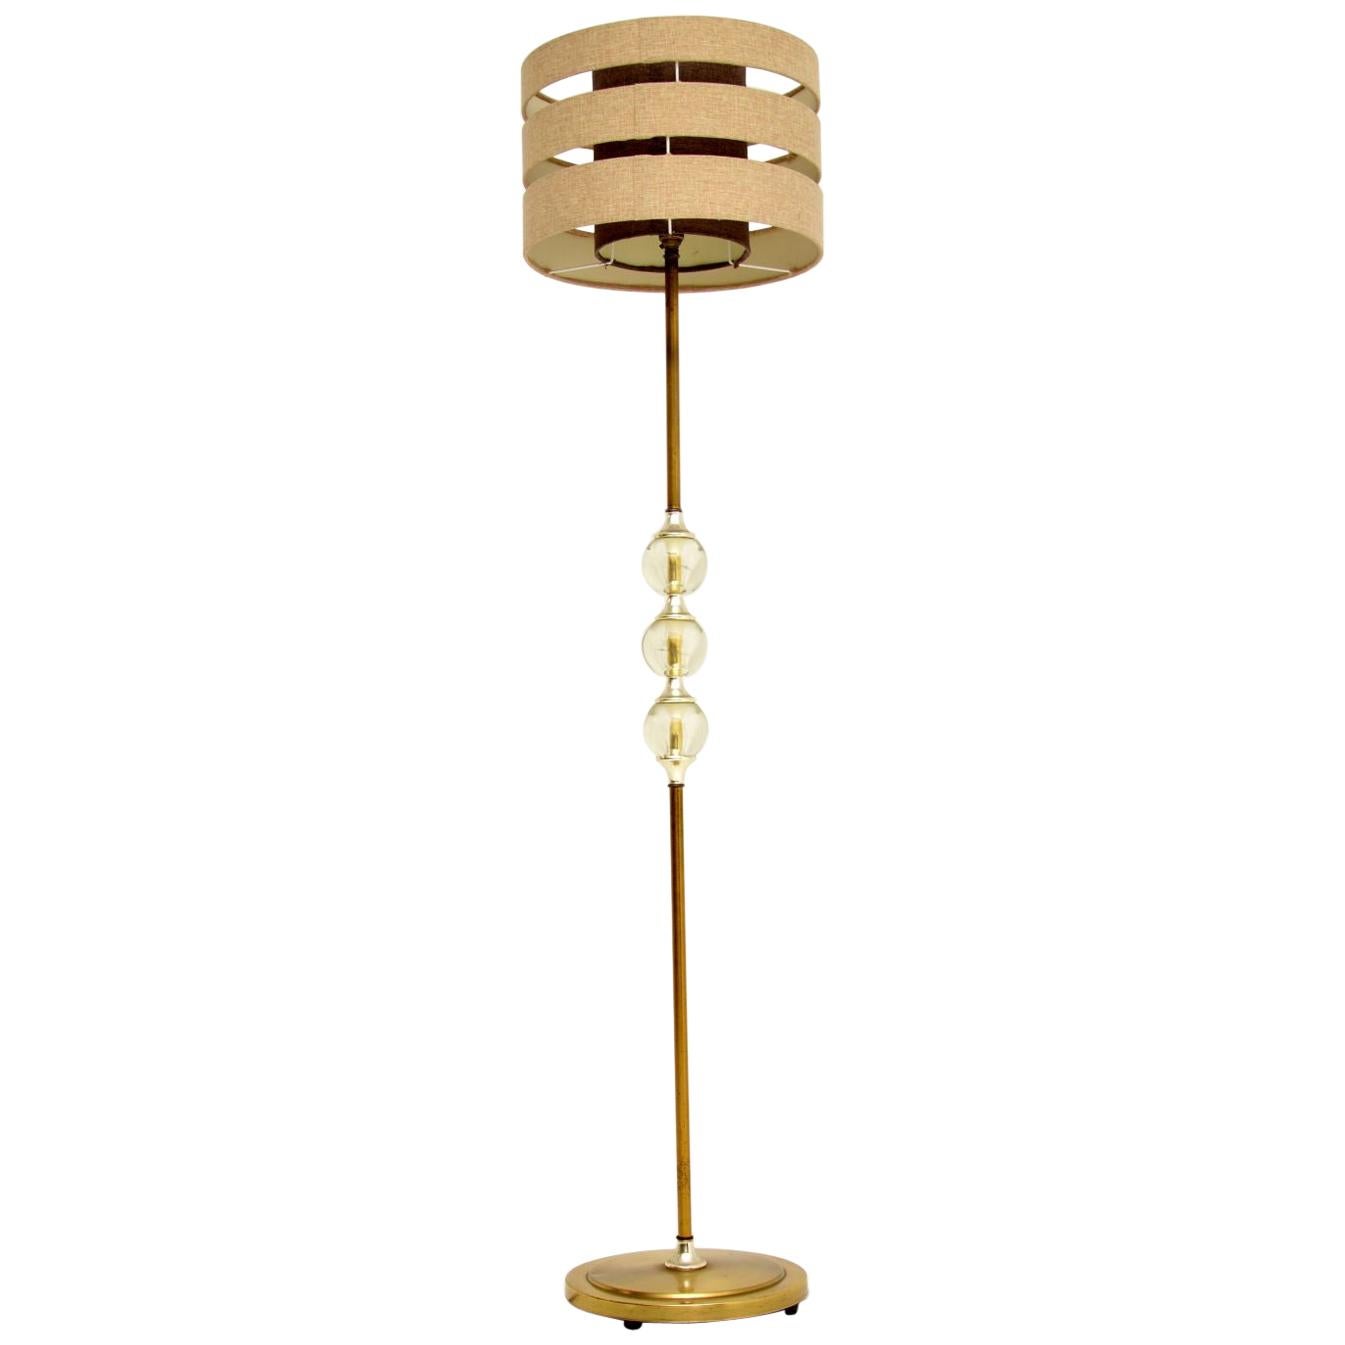 1960s Vintage Brass and Acrylic Floor Lamp